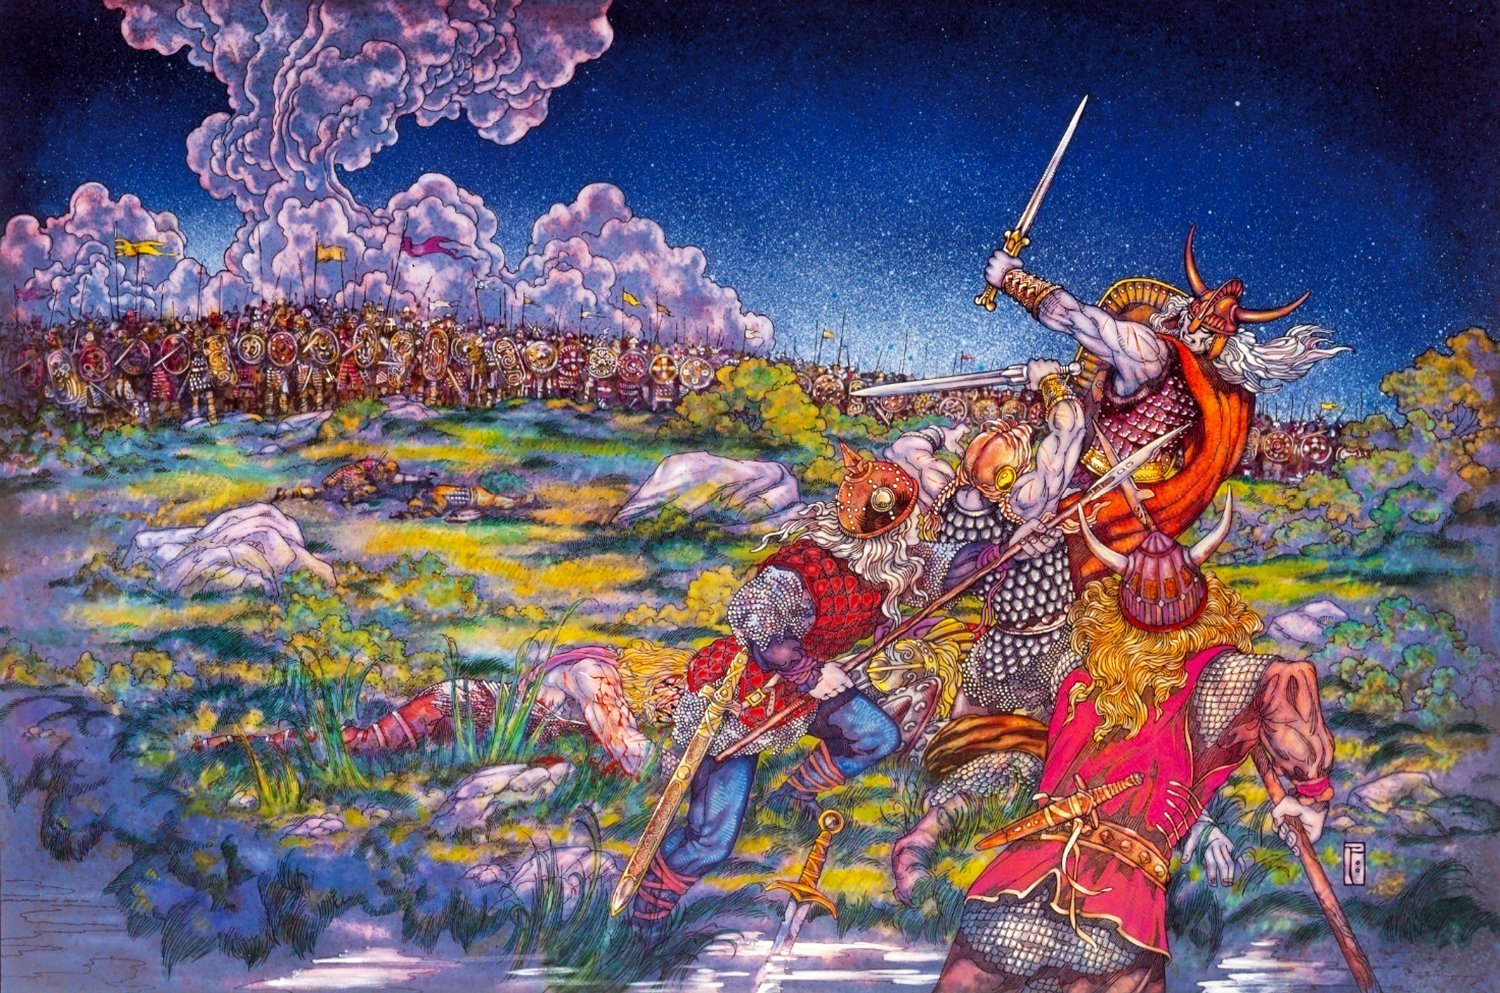 “The Battle of Moira (Battle of Magh Rath)” by Jim Fitzpatrick vividly portrays the pivotal combat, where, as Samuel Ferguson noted, a win for Congal could have revived Ireland's old bardic paganism.